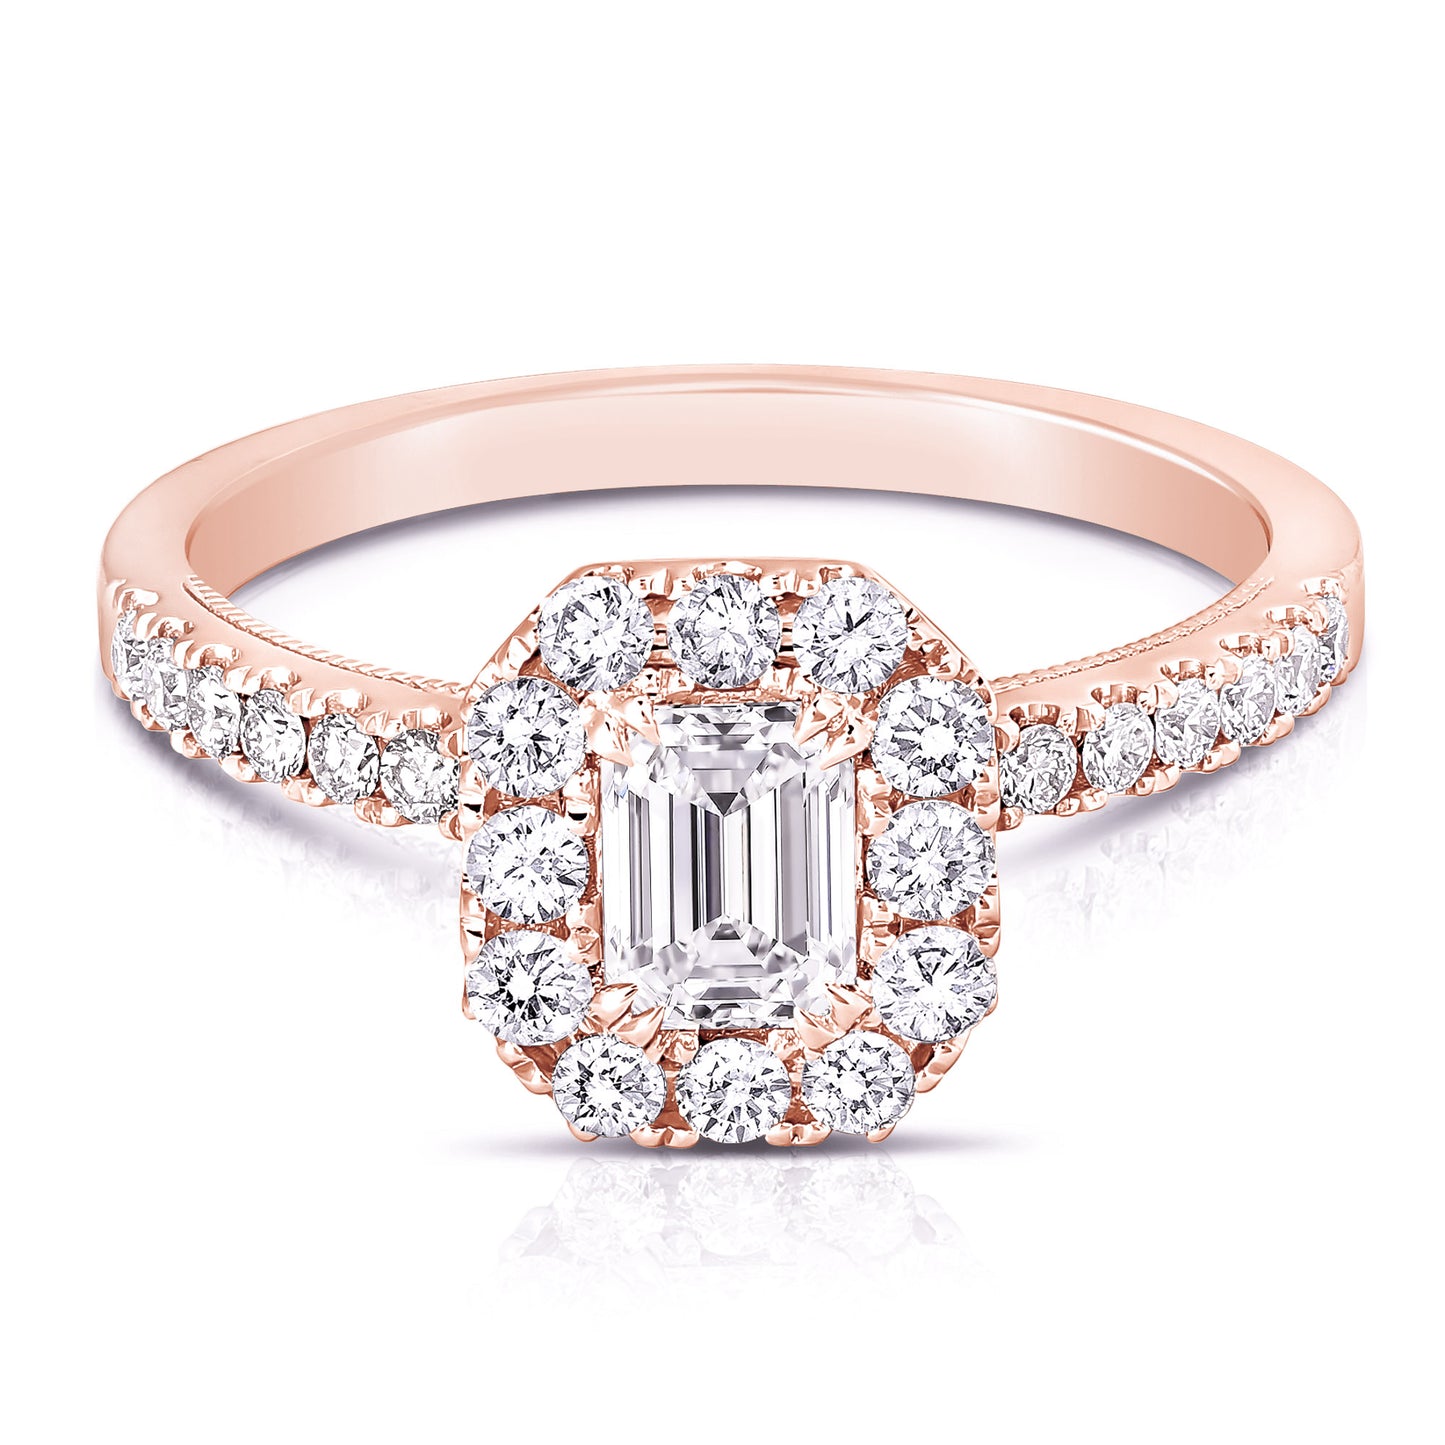 Load image into Gallery viewer, 1/2 CT CENTER EMERALD CUT HALO DIAMOND ENGAGEMENT RING
